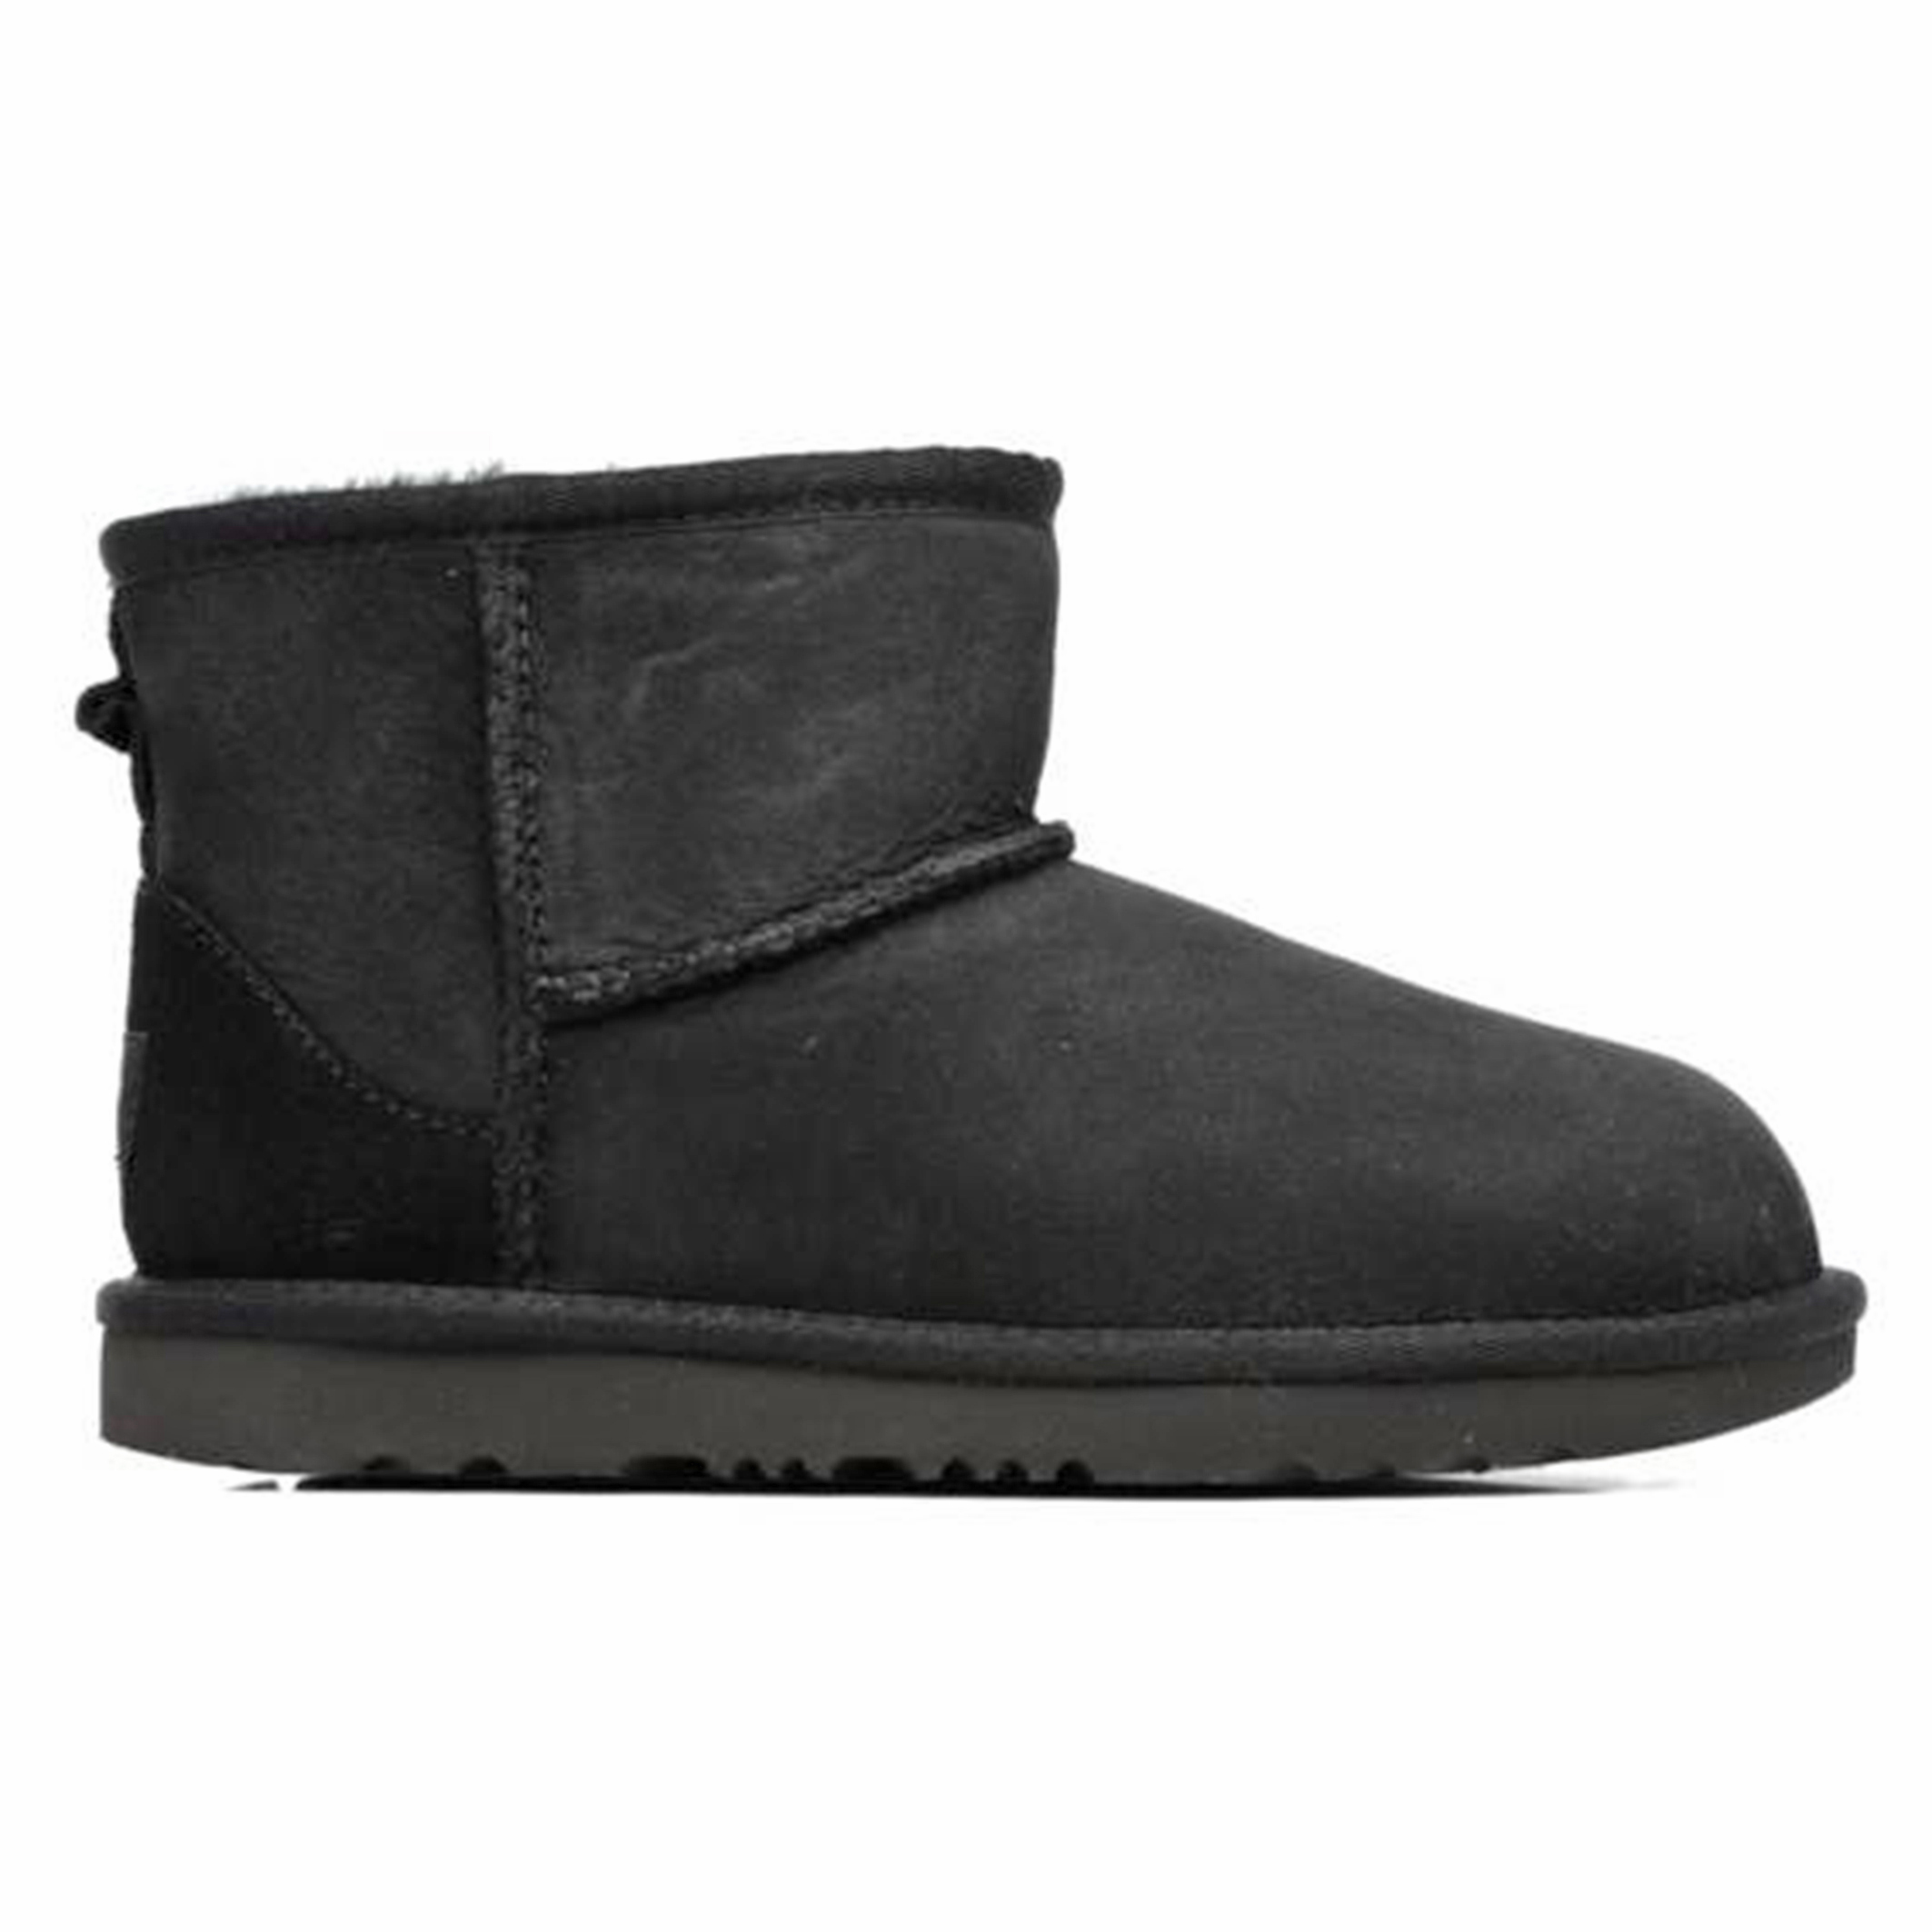 Kids classic mini ii ankle boots in suede with faux fur lining, black ...